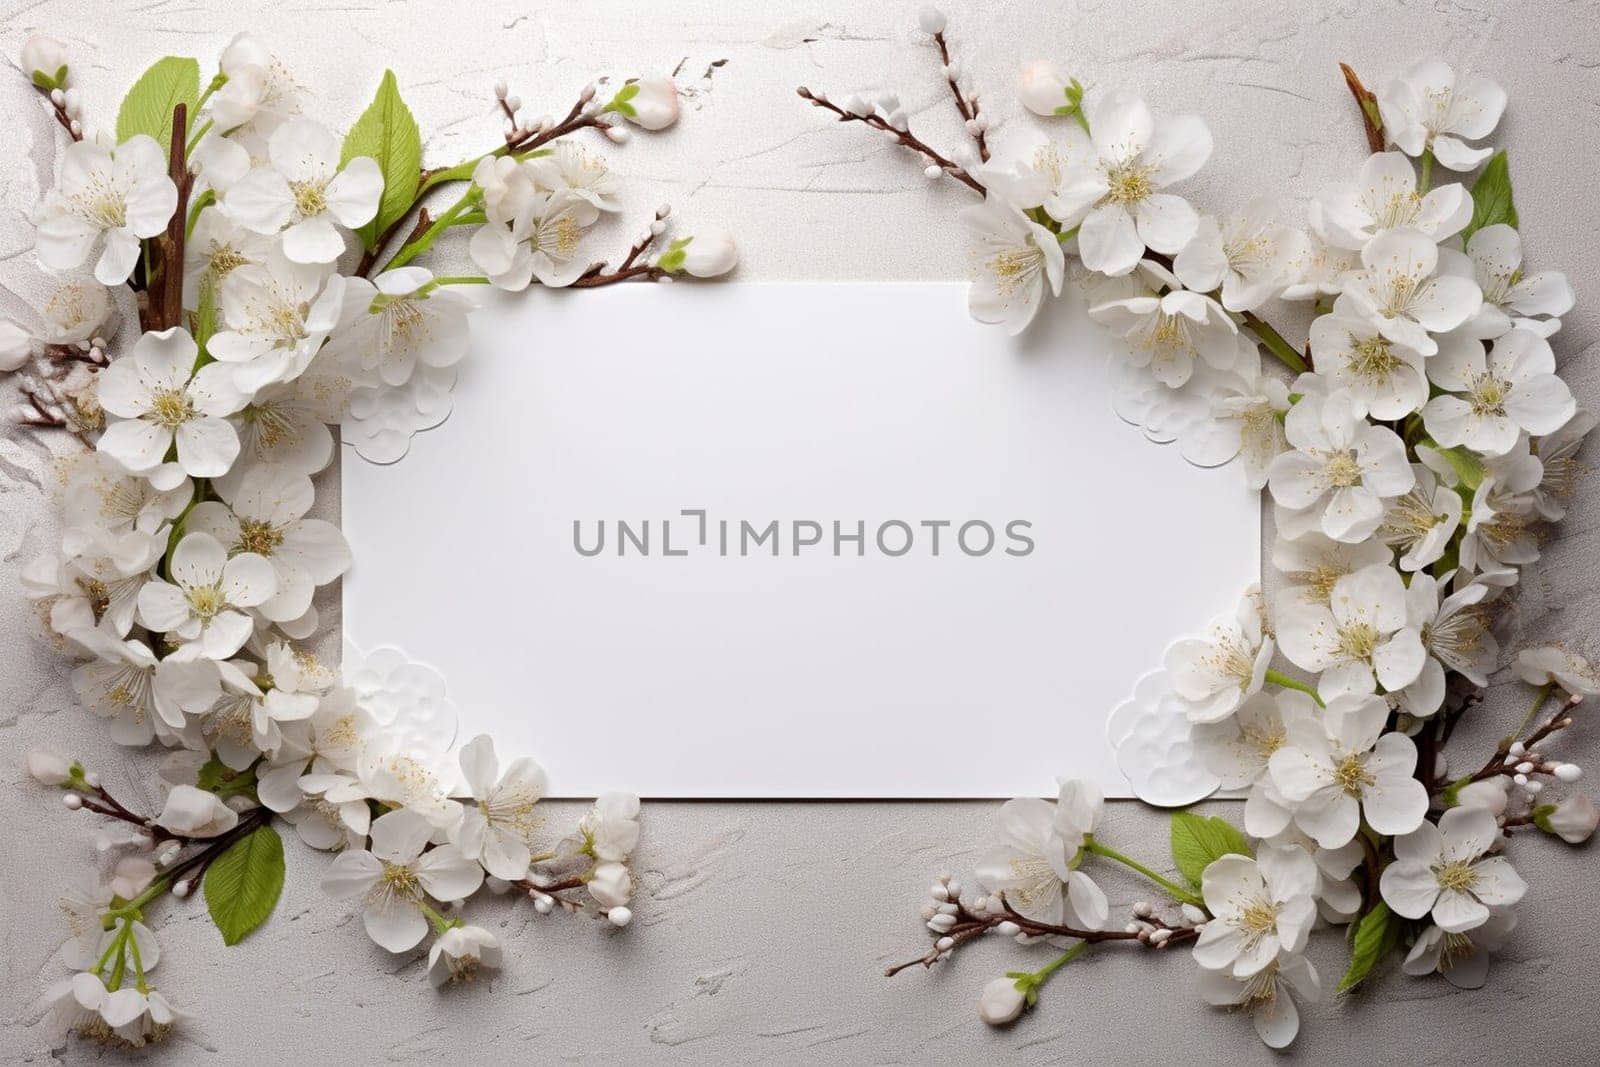 Spring decorations background with beautiful white wild flowers. Copy space for text banner